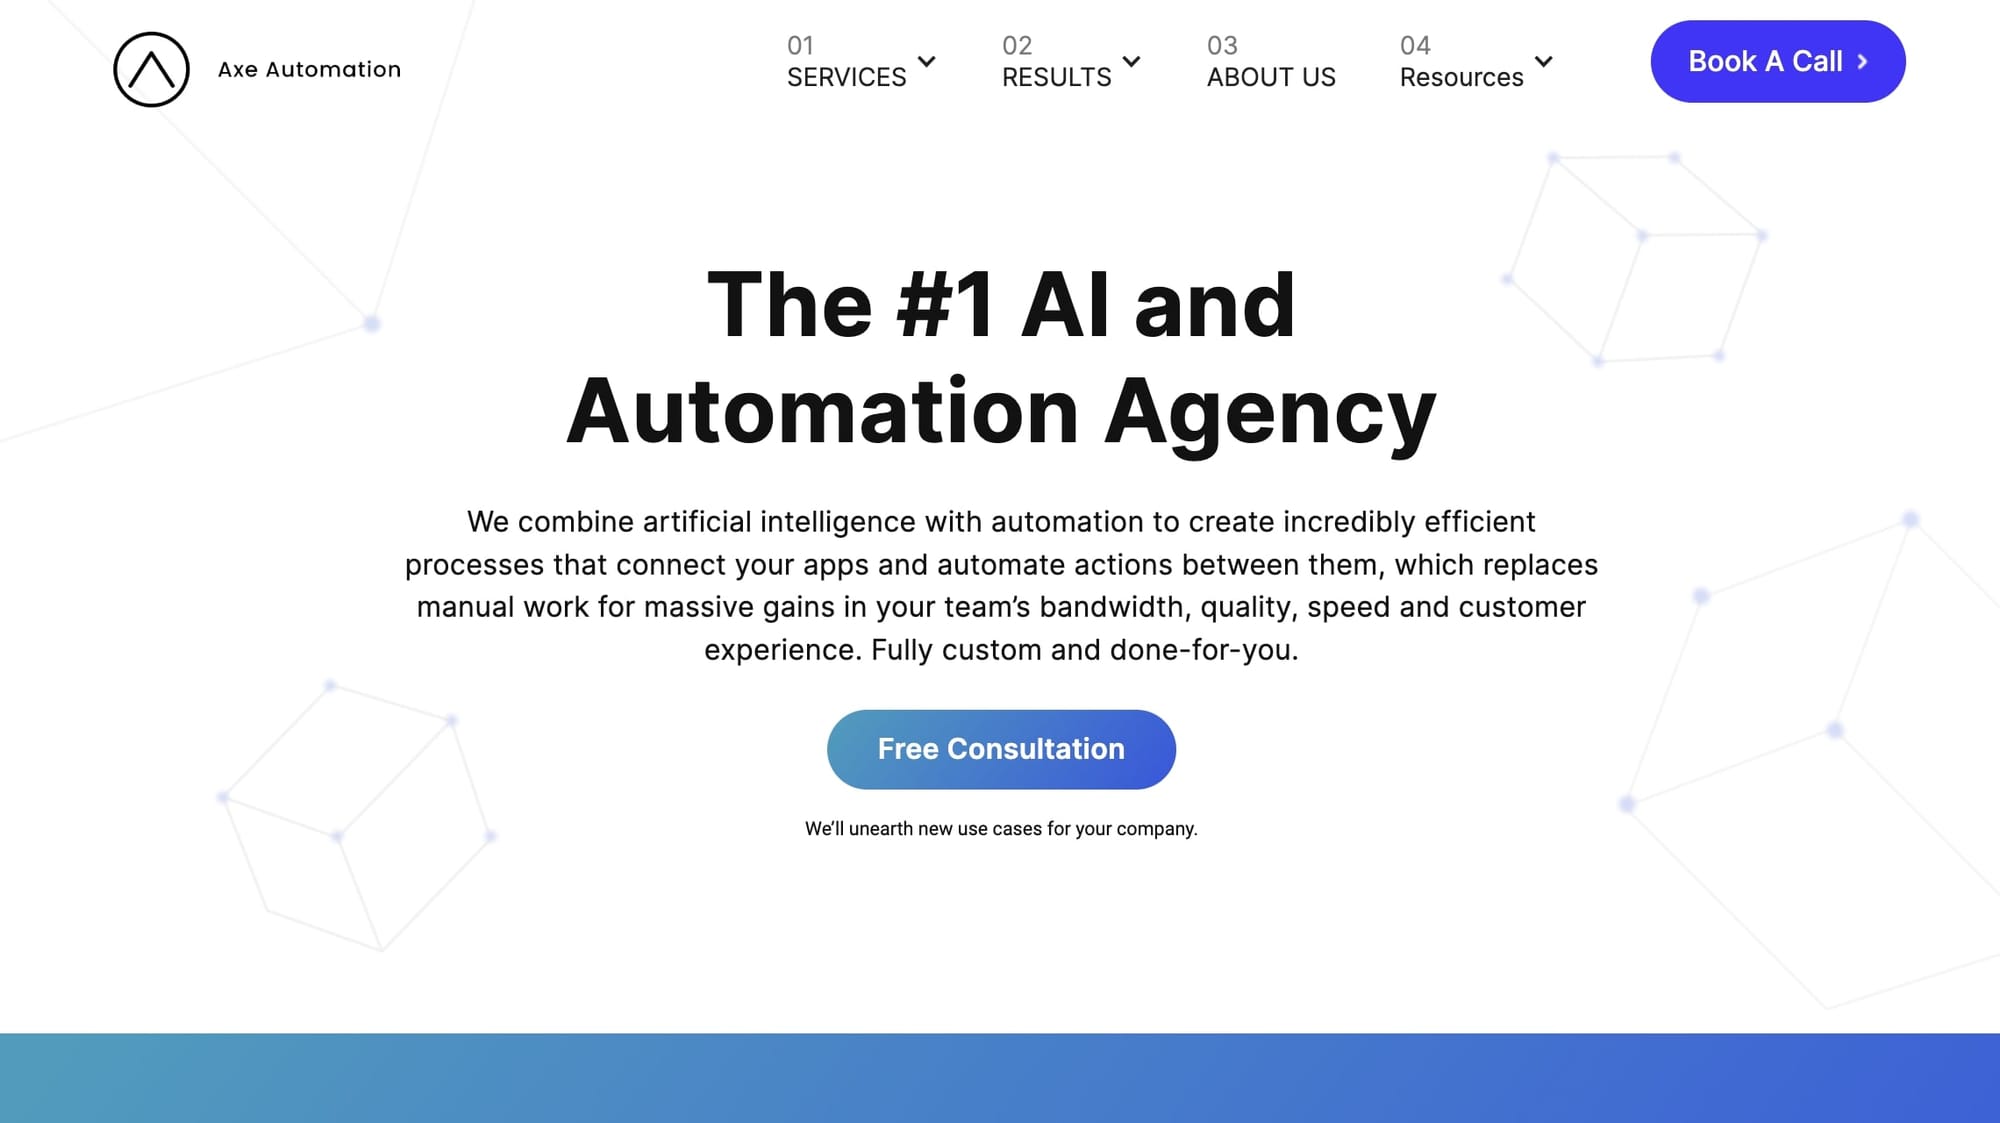 Axe Automation agency